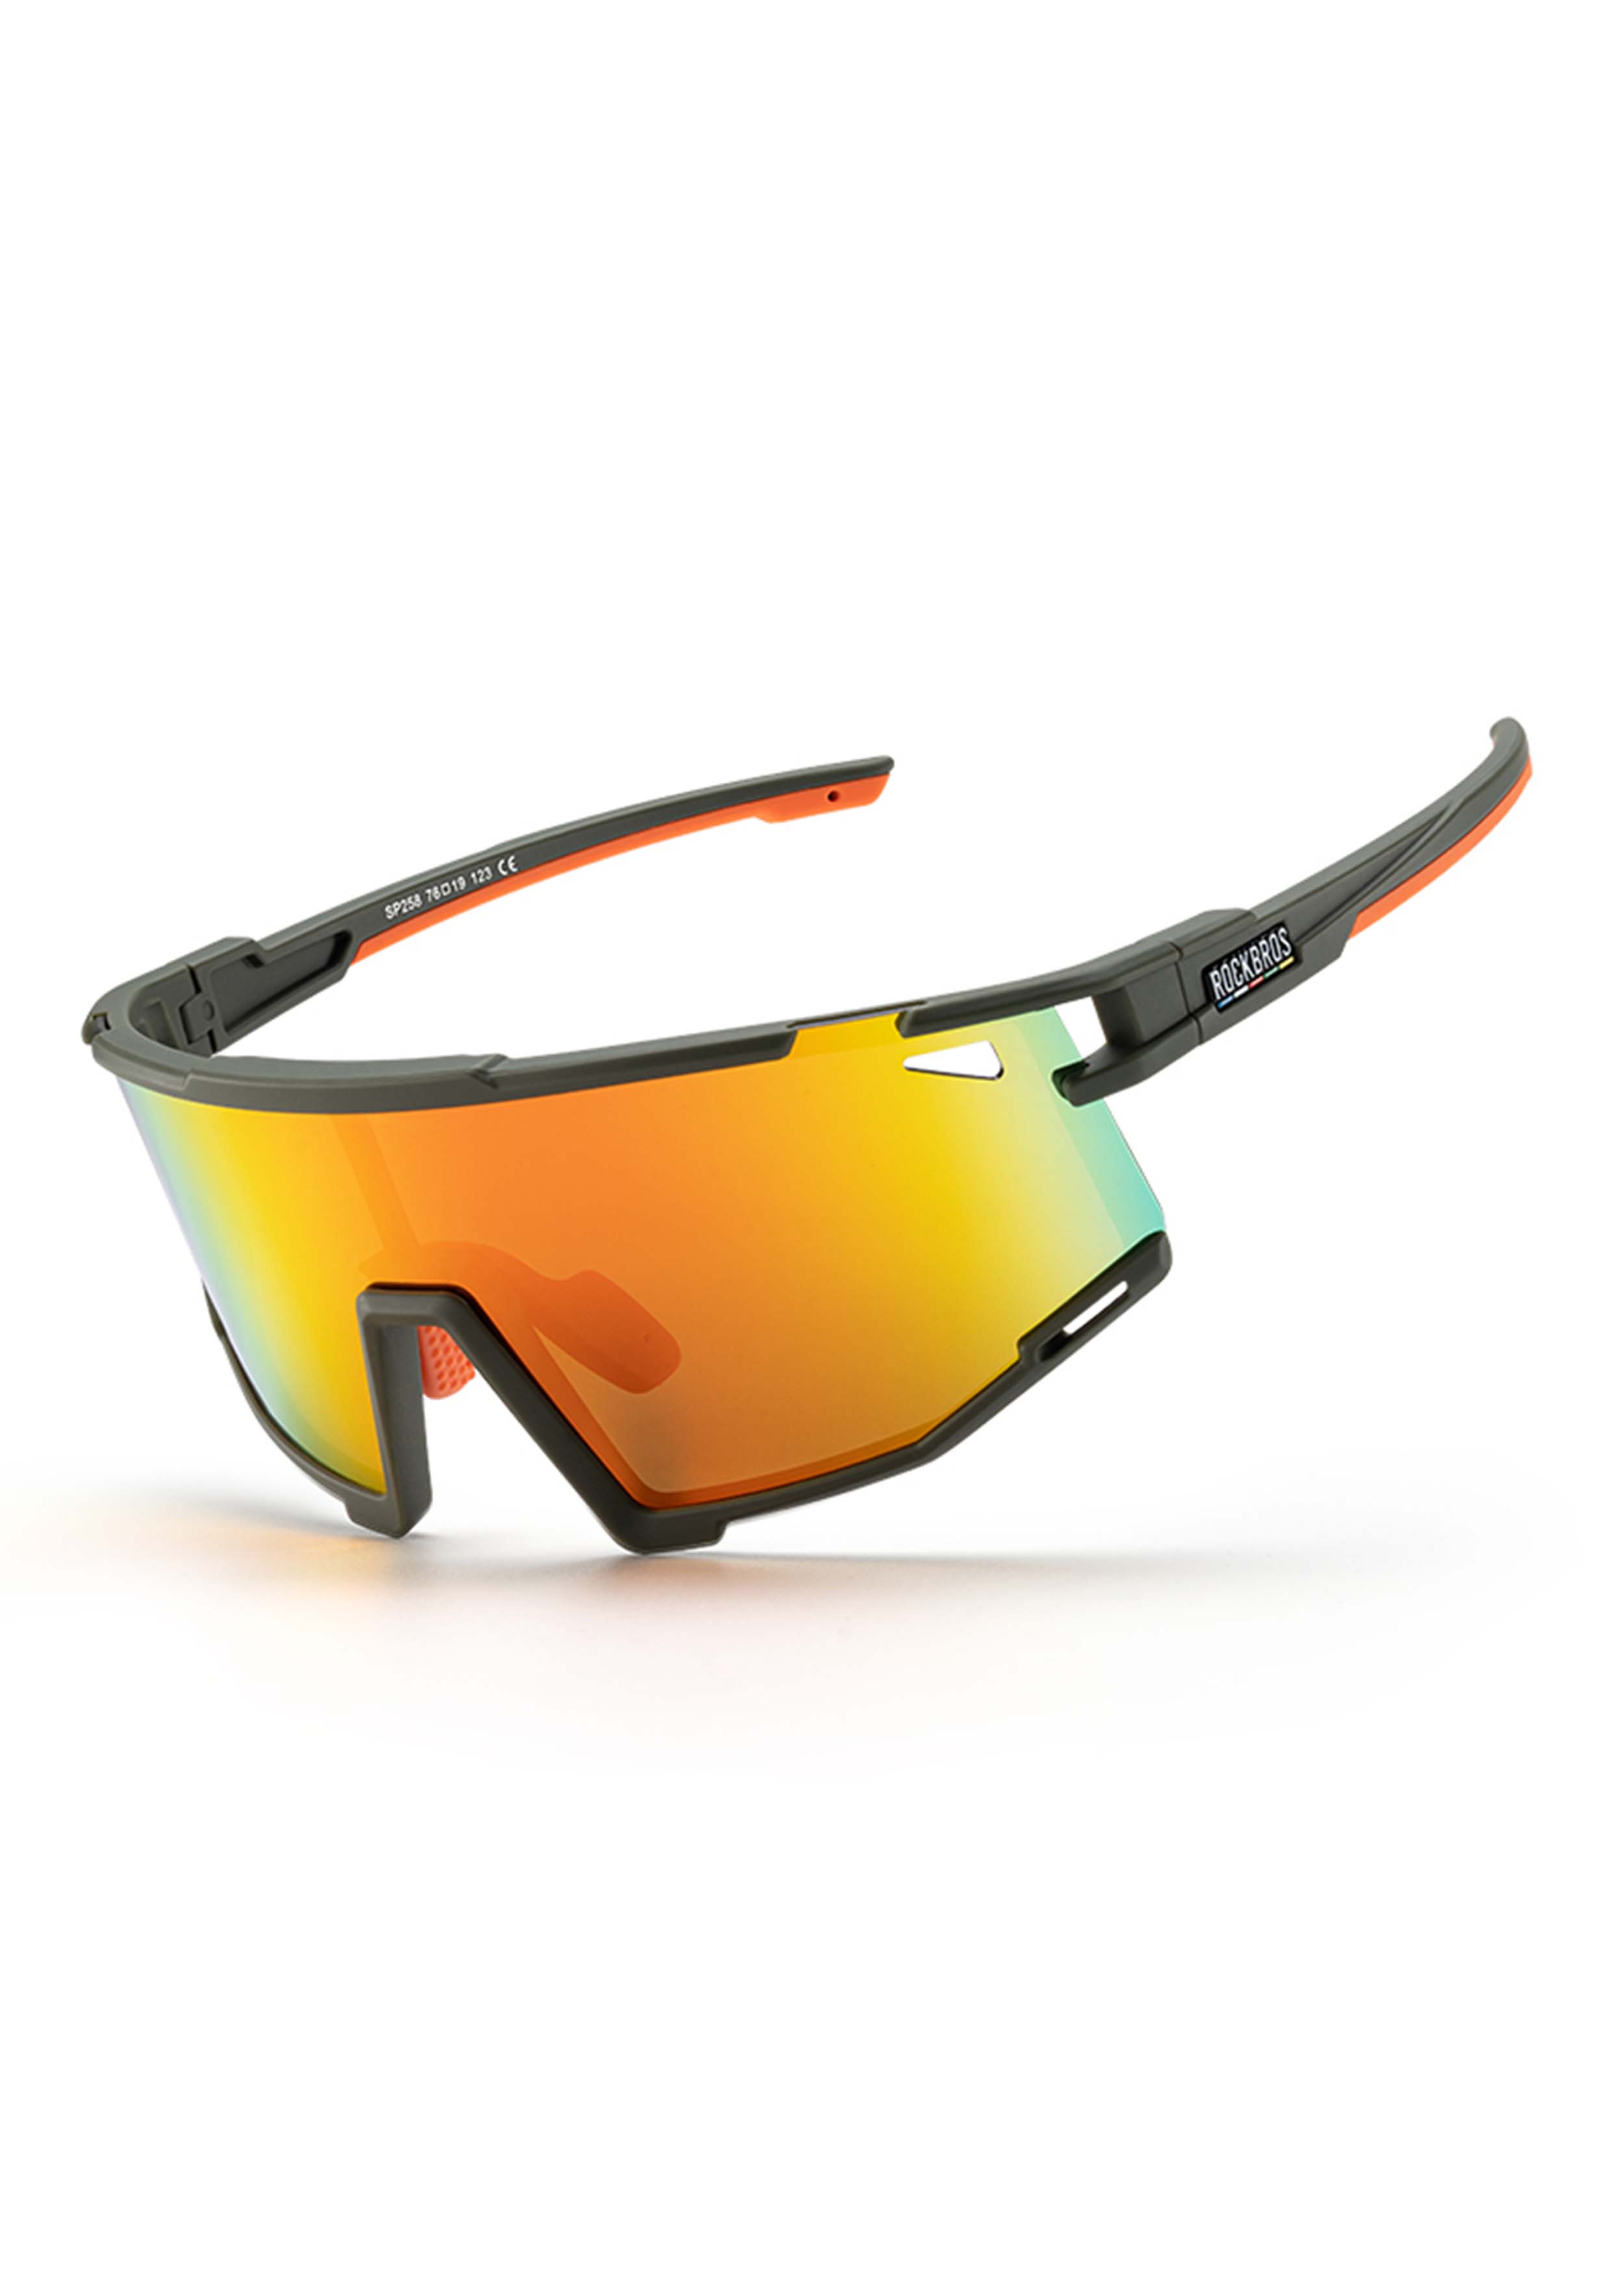 ROCKBROS Road-to-Sky Cycling Glasses - Polarized/Color Changing #Color_Polarized Orange Red